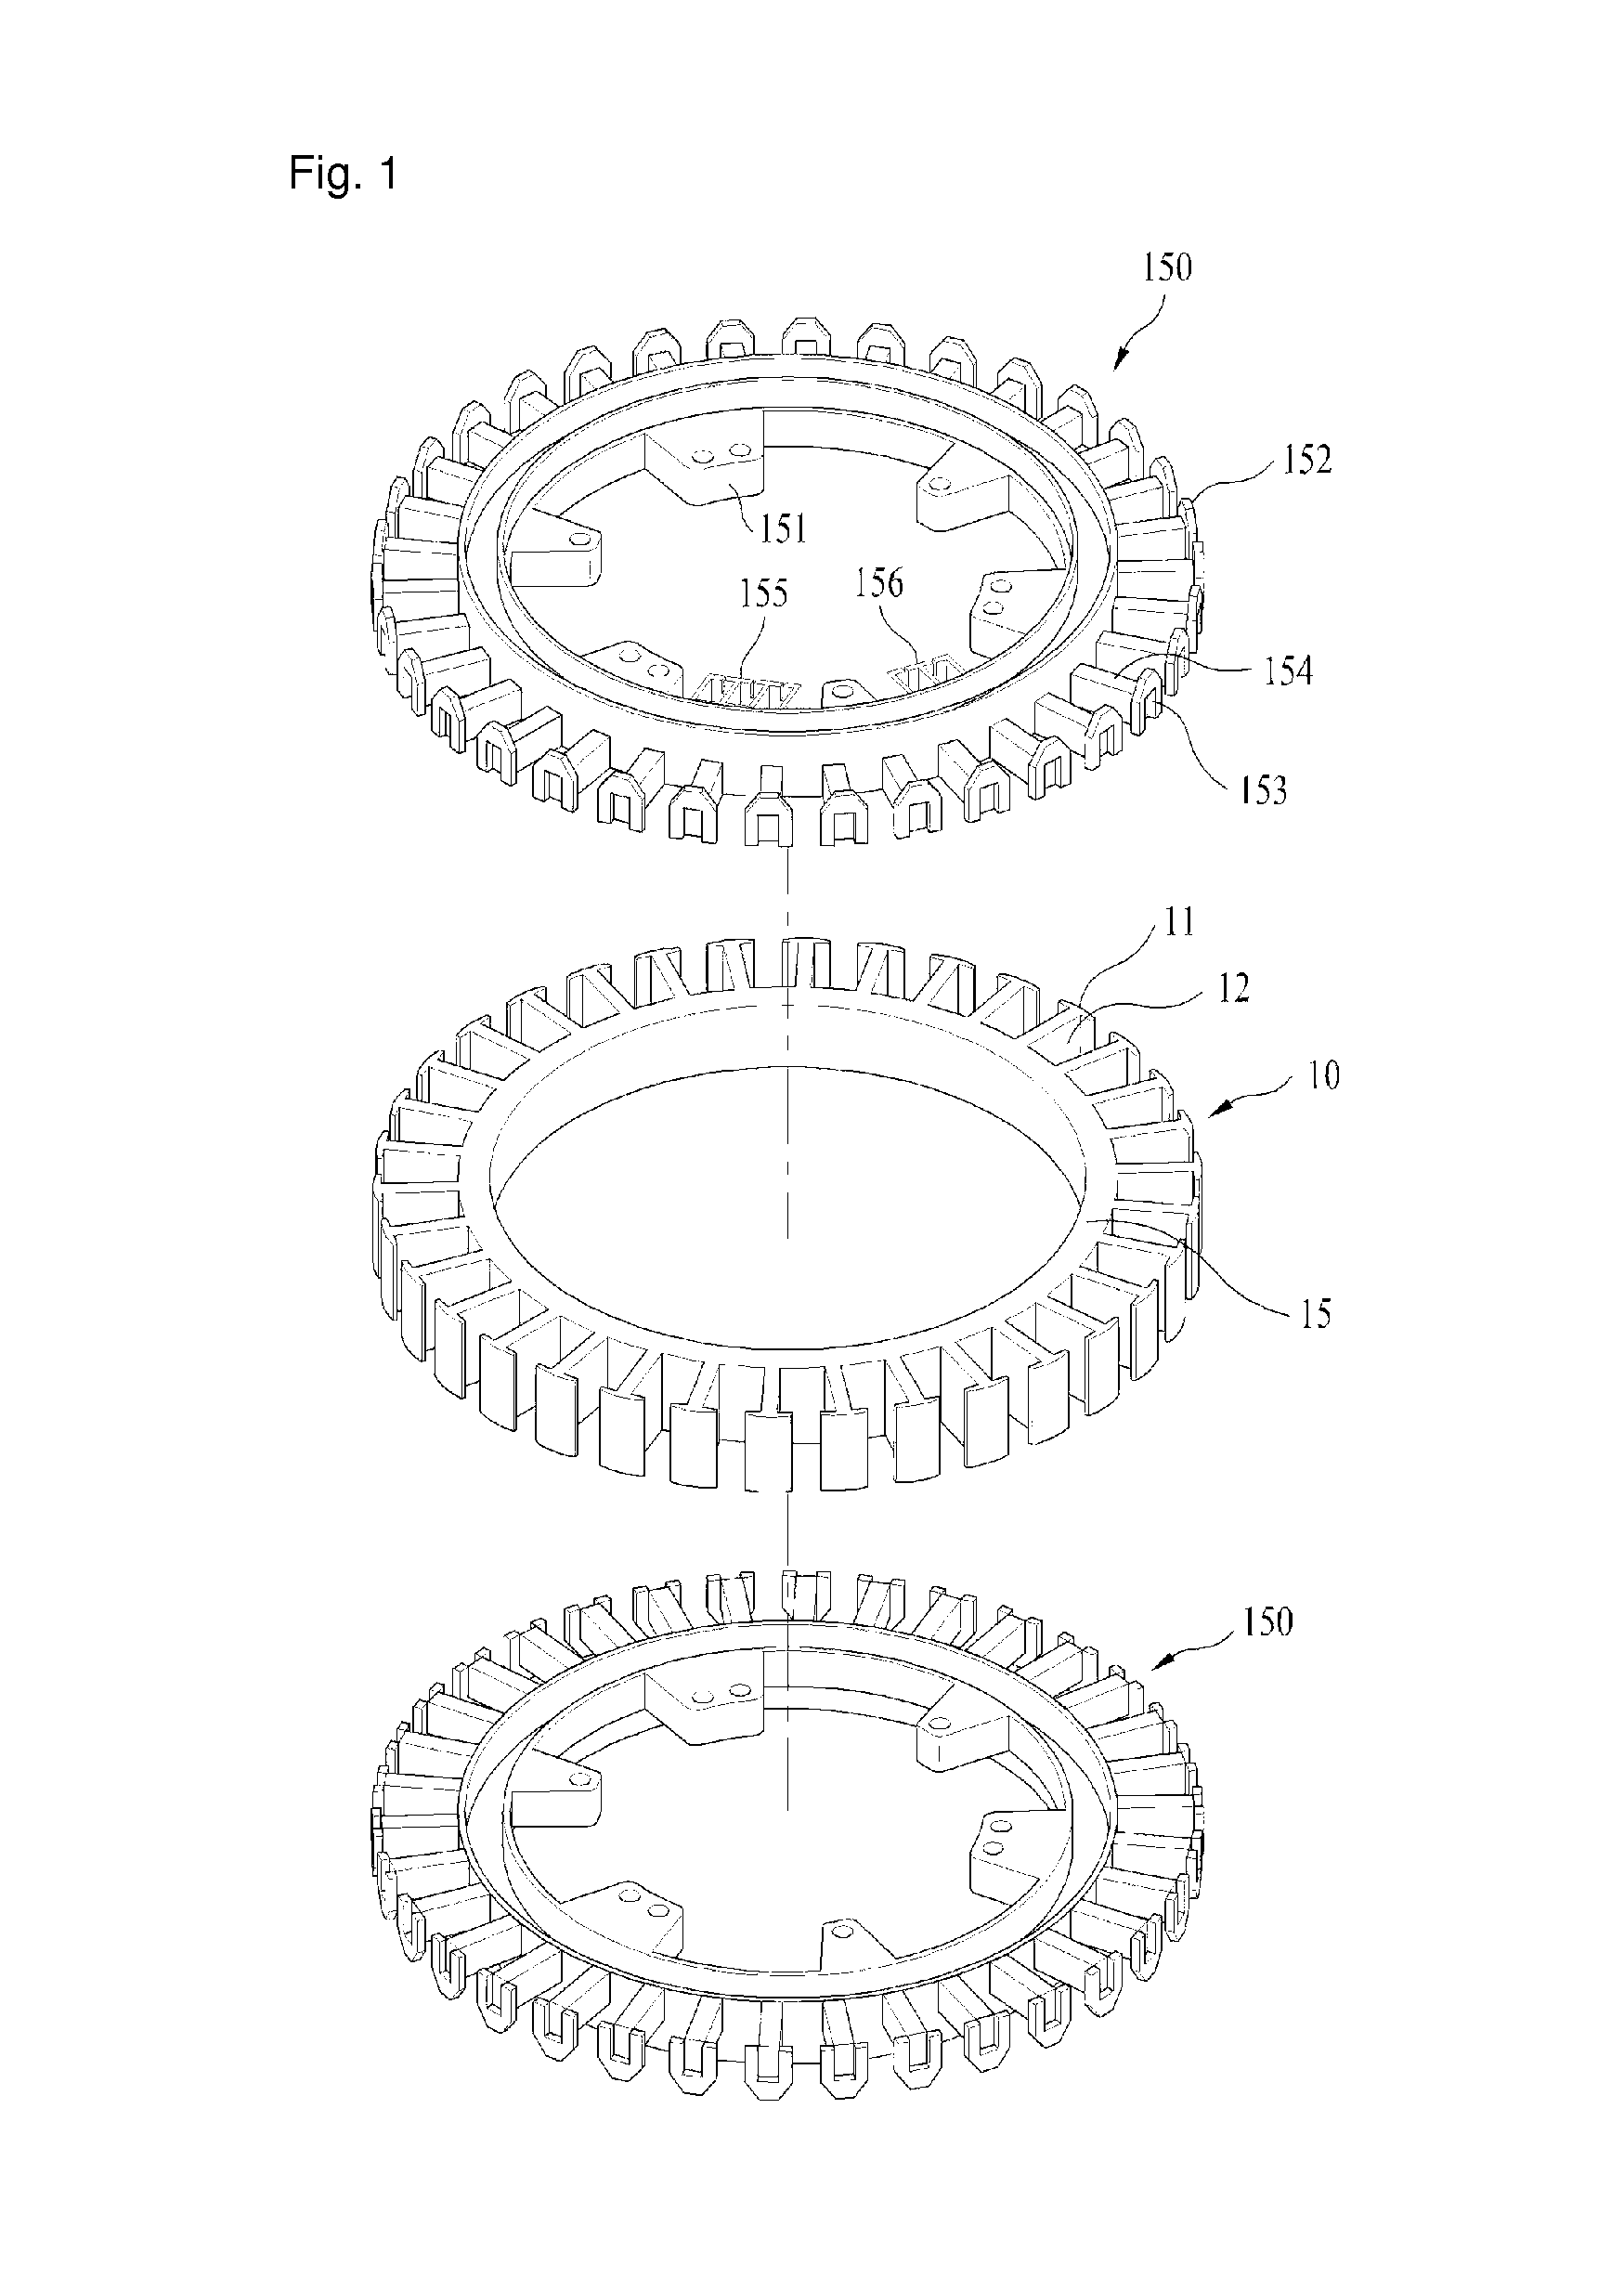 Stator assembly for motor having hall sensor part fixed to end of tooth of stator